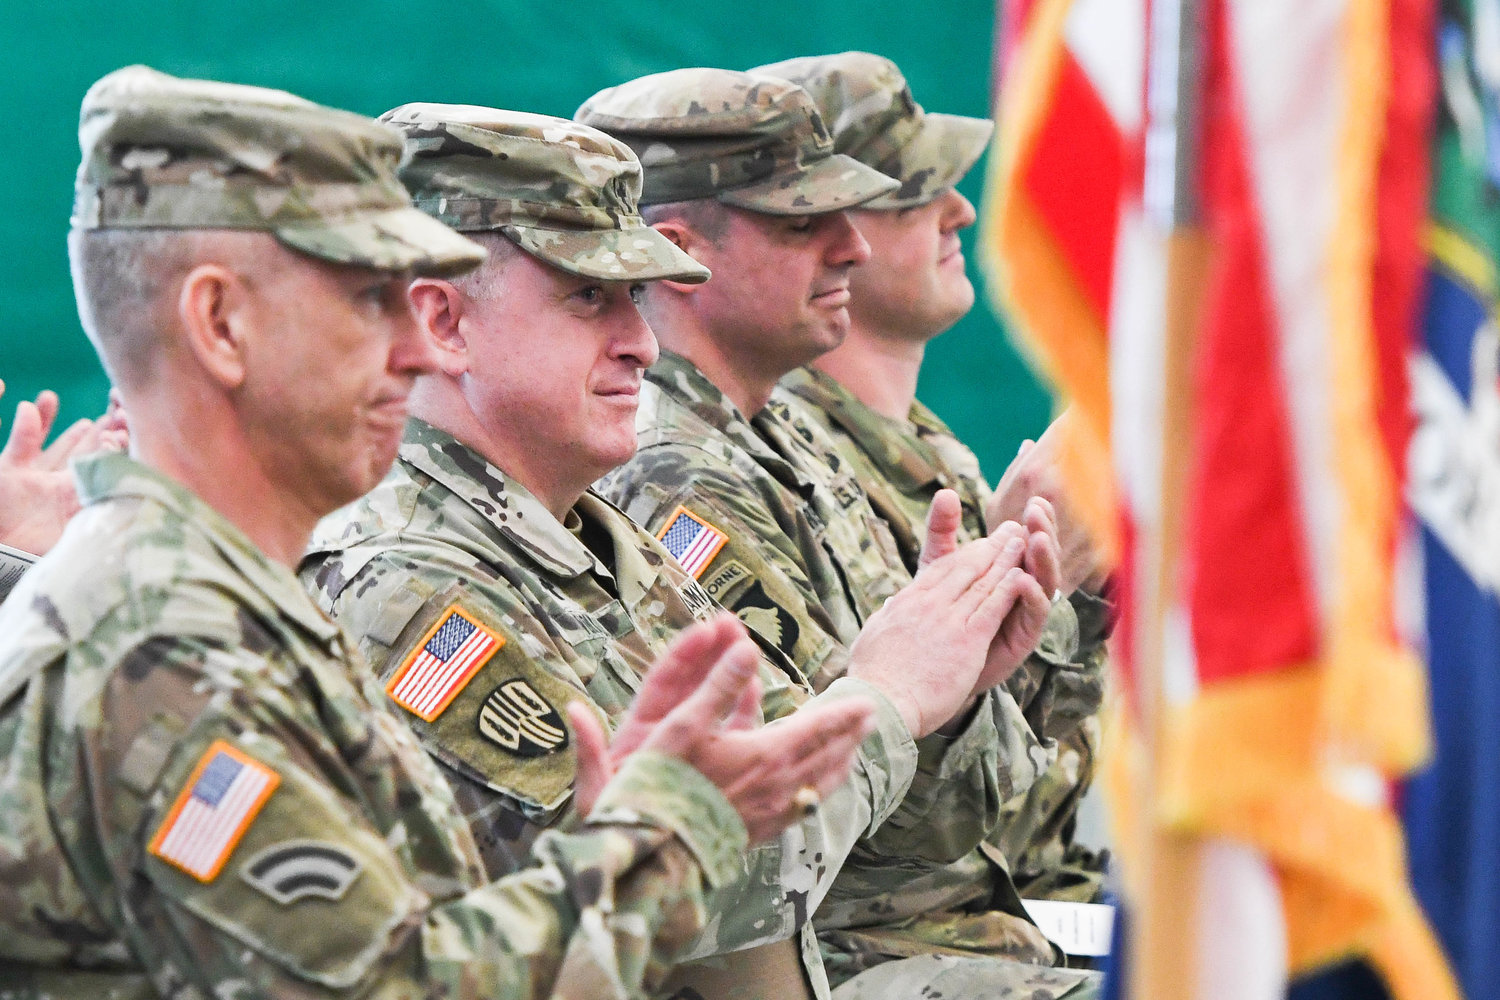 Officers clap as soldiers of the 2nd Battalion, 108th Infantry of the New York Army National Guard are recognized during a farewell ceremony hosted by Mohawk Valley Community College on Tuesday morning.